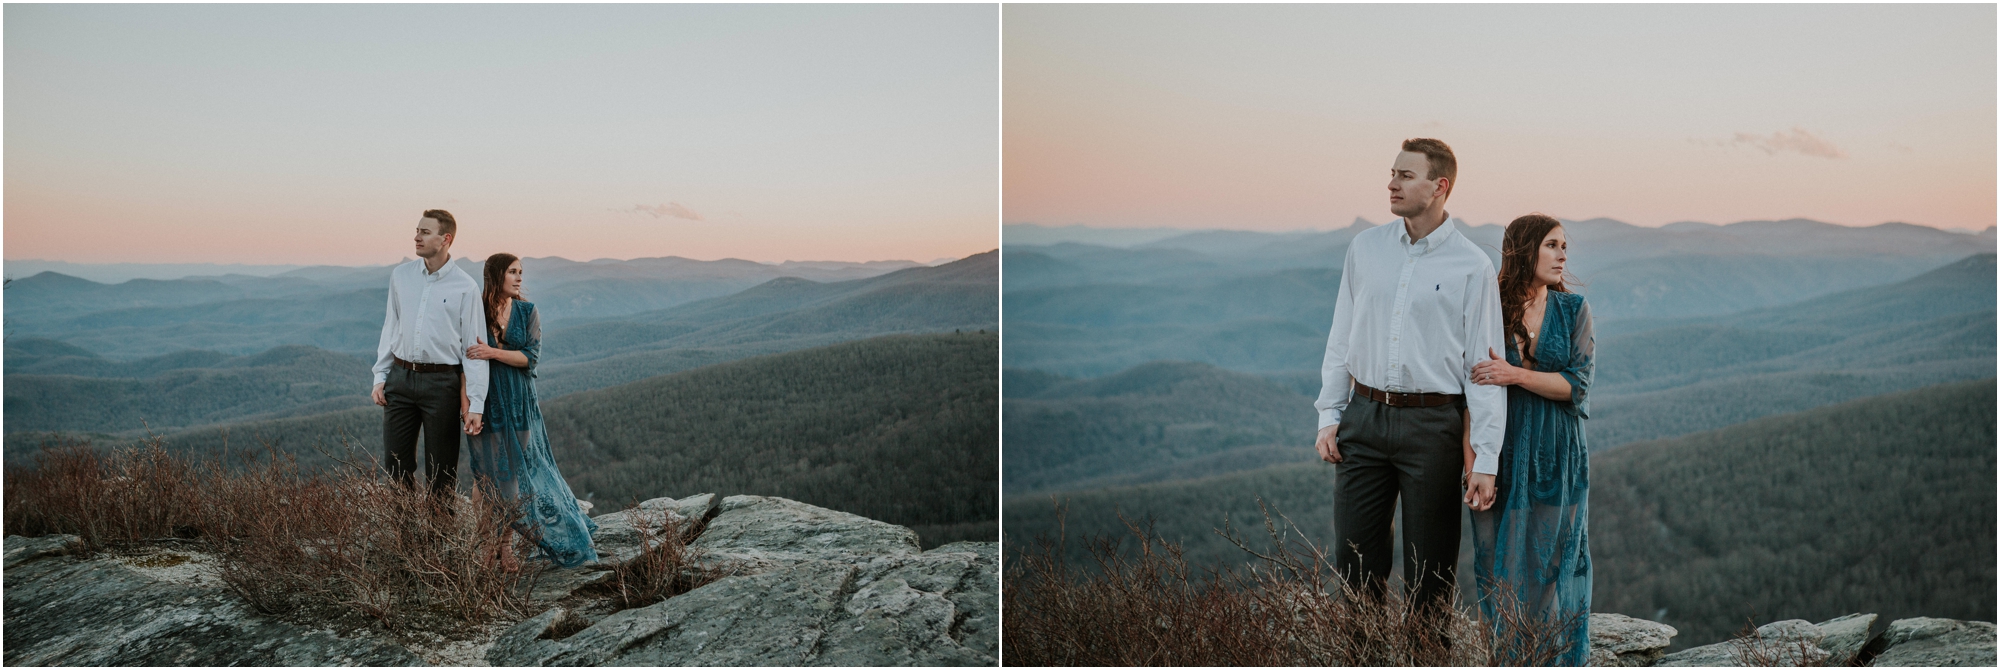 blue-ridge-parkway-engagement-session-north-carolina-boone-blowing-rock-northeast-tennessee-katy-sergent-photography_0031.jpg